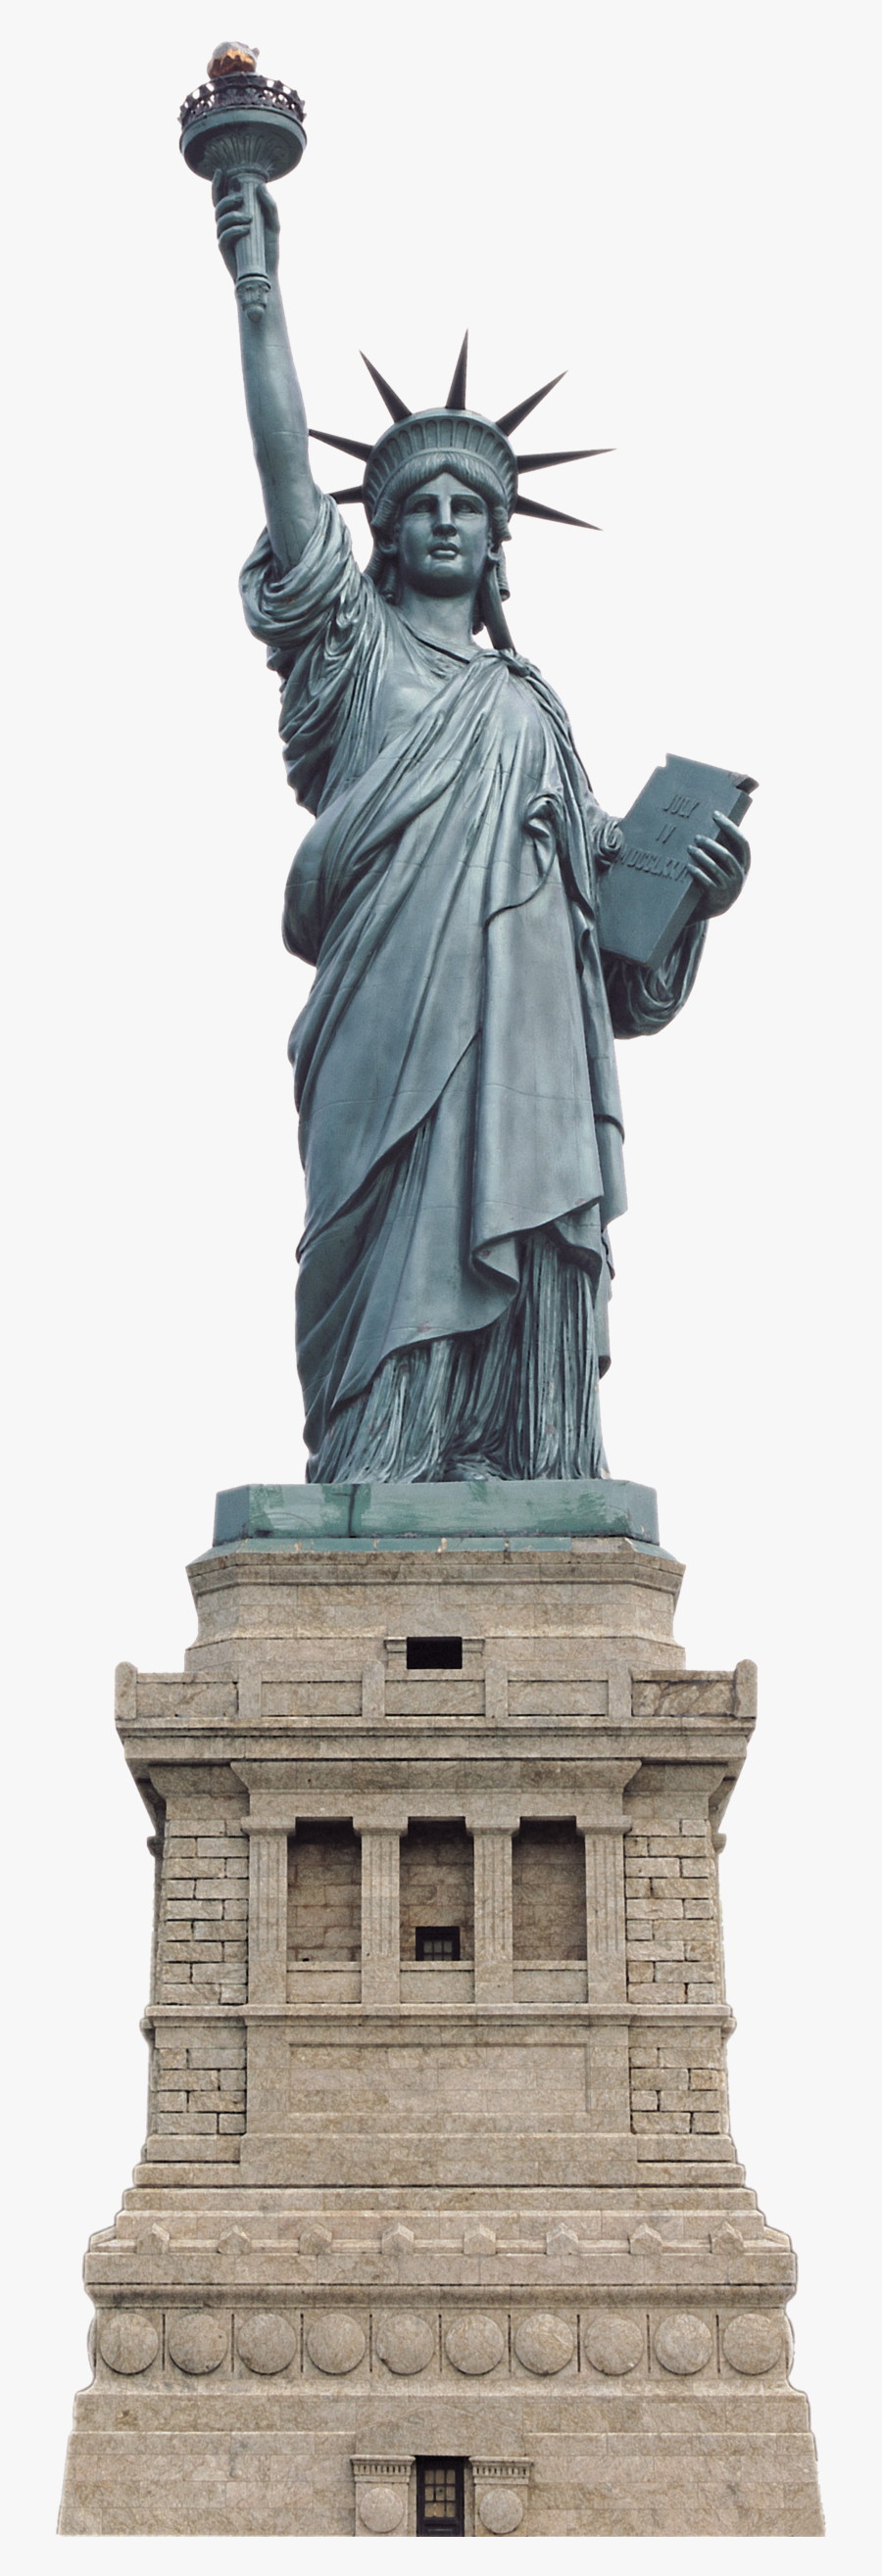 Statue Of Liberty Free Download Png - Statue Of Liberty Transparent Background, Transparent Clipart